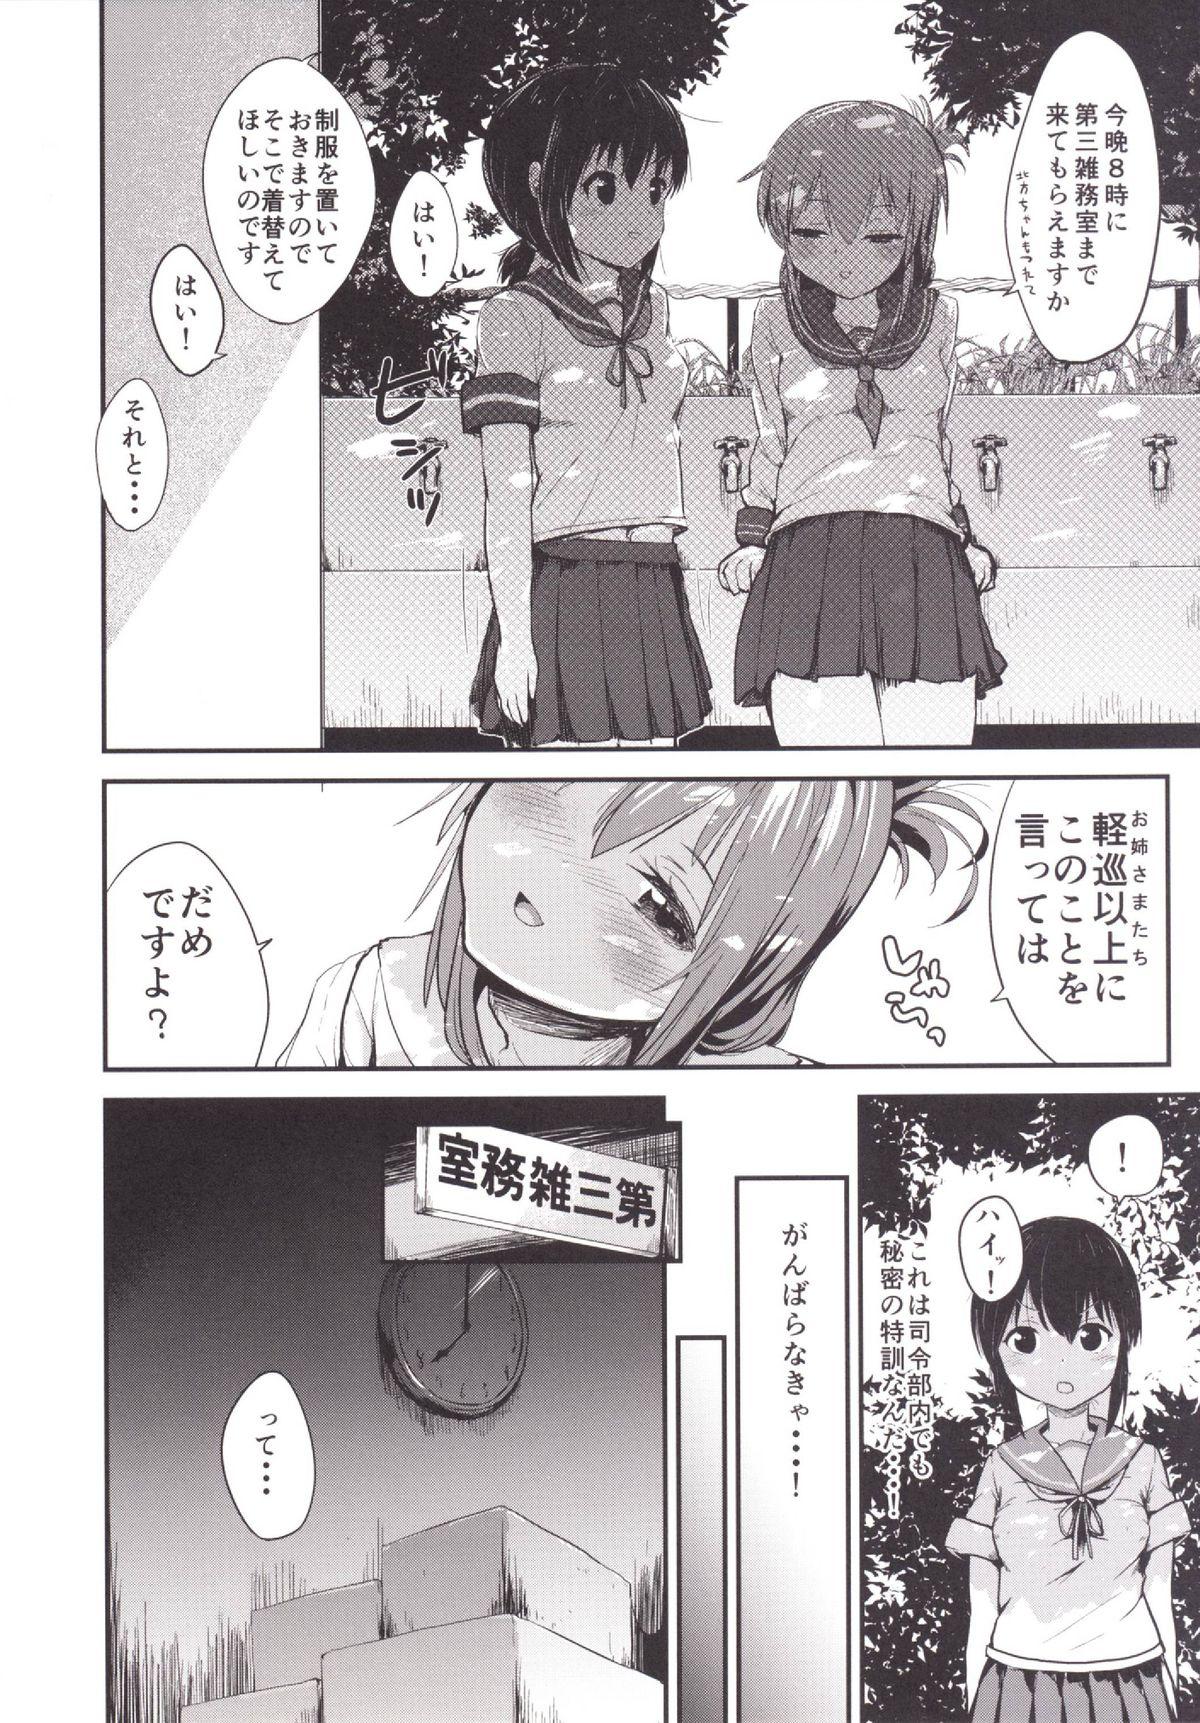 Bubble Butt Kuchikukan Loliloli Fuuzoku e Youkoso! - Welcome to the destroyer's sex party - Kantai collection Black Gay - Page 7